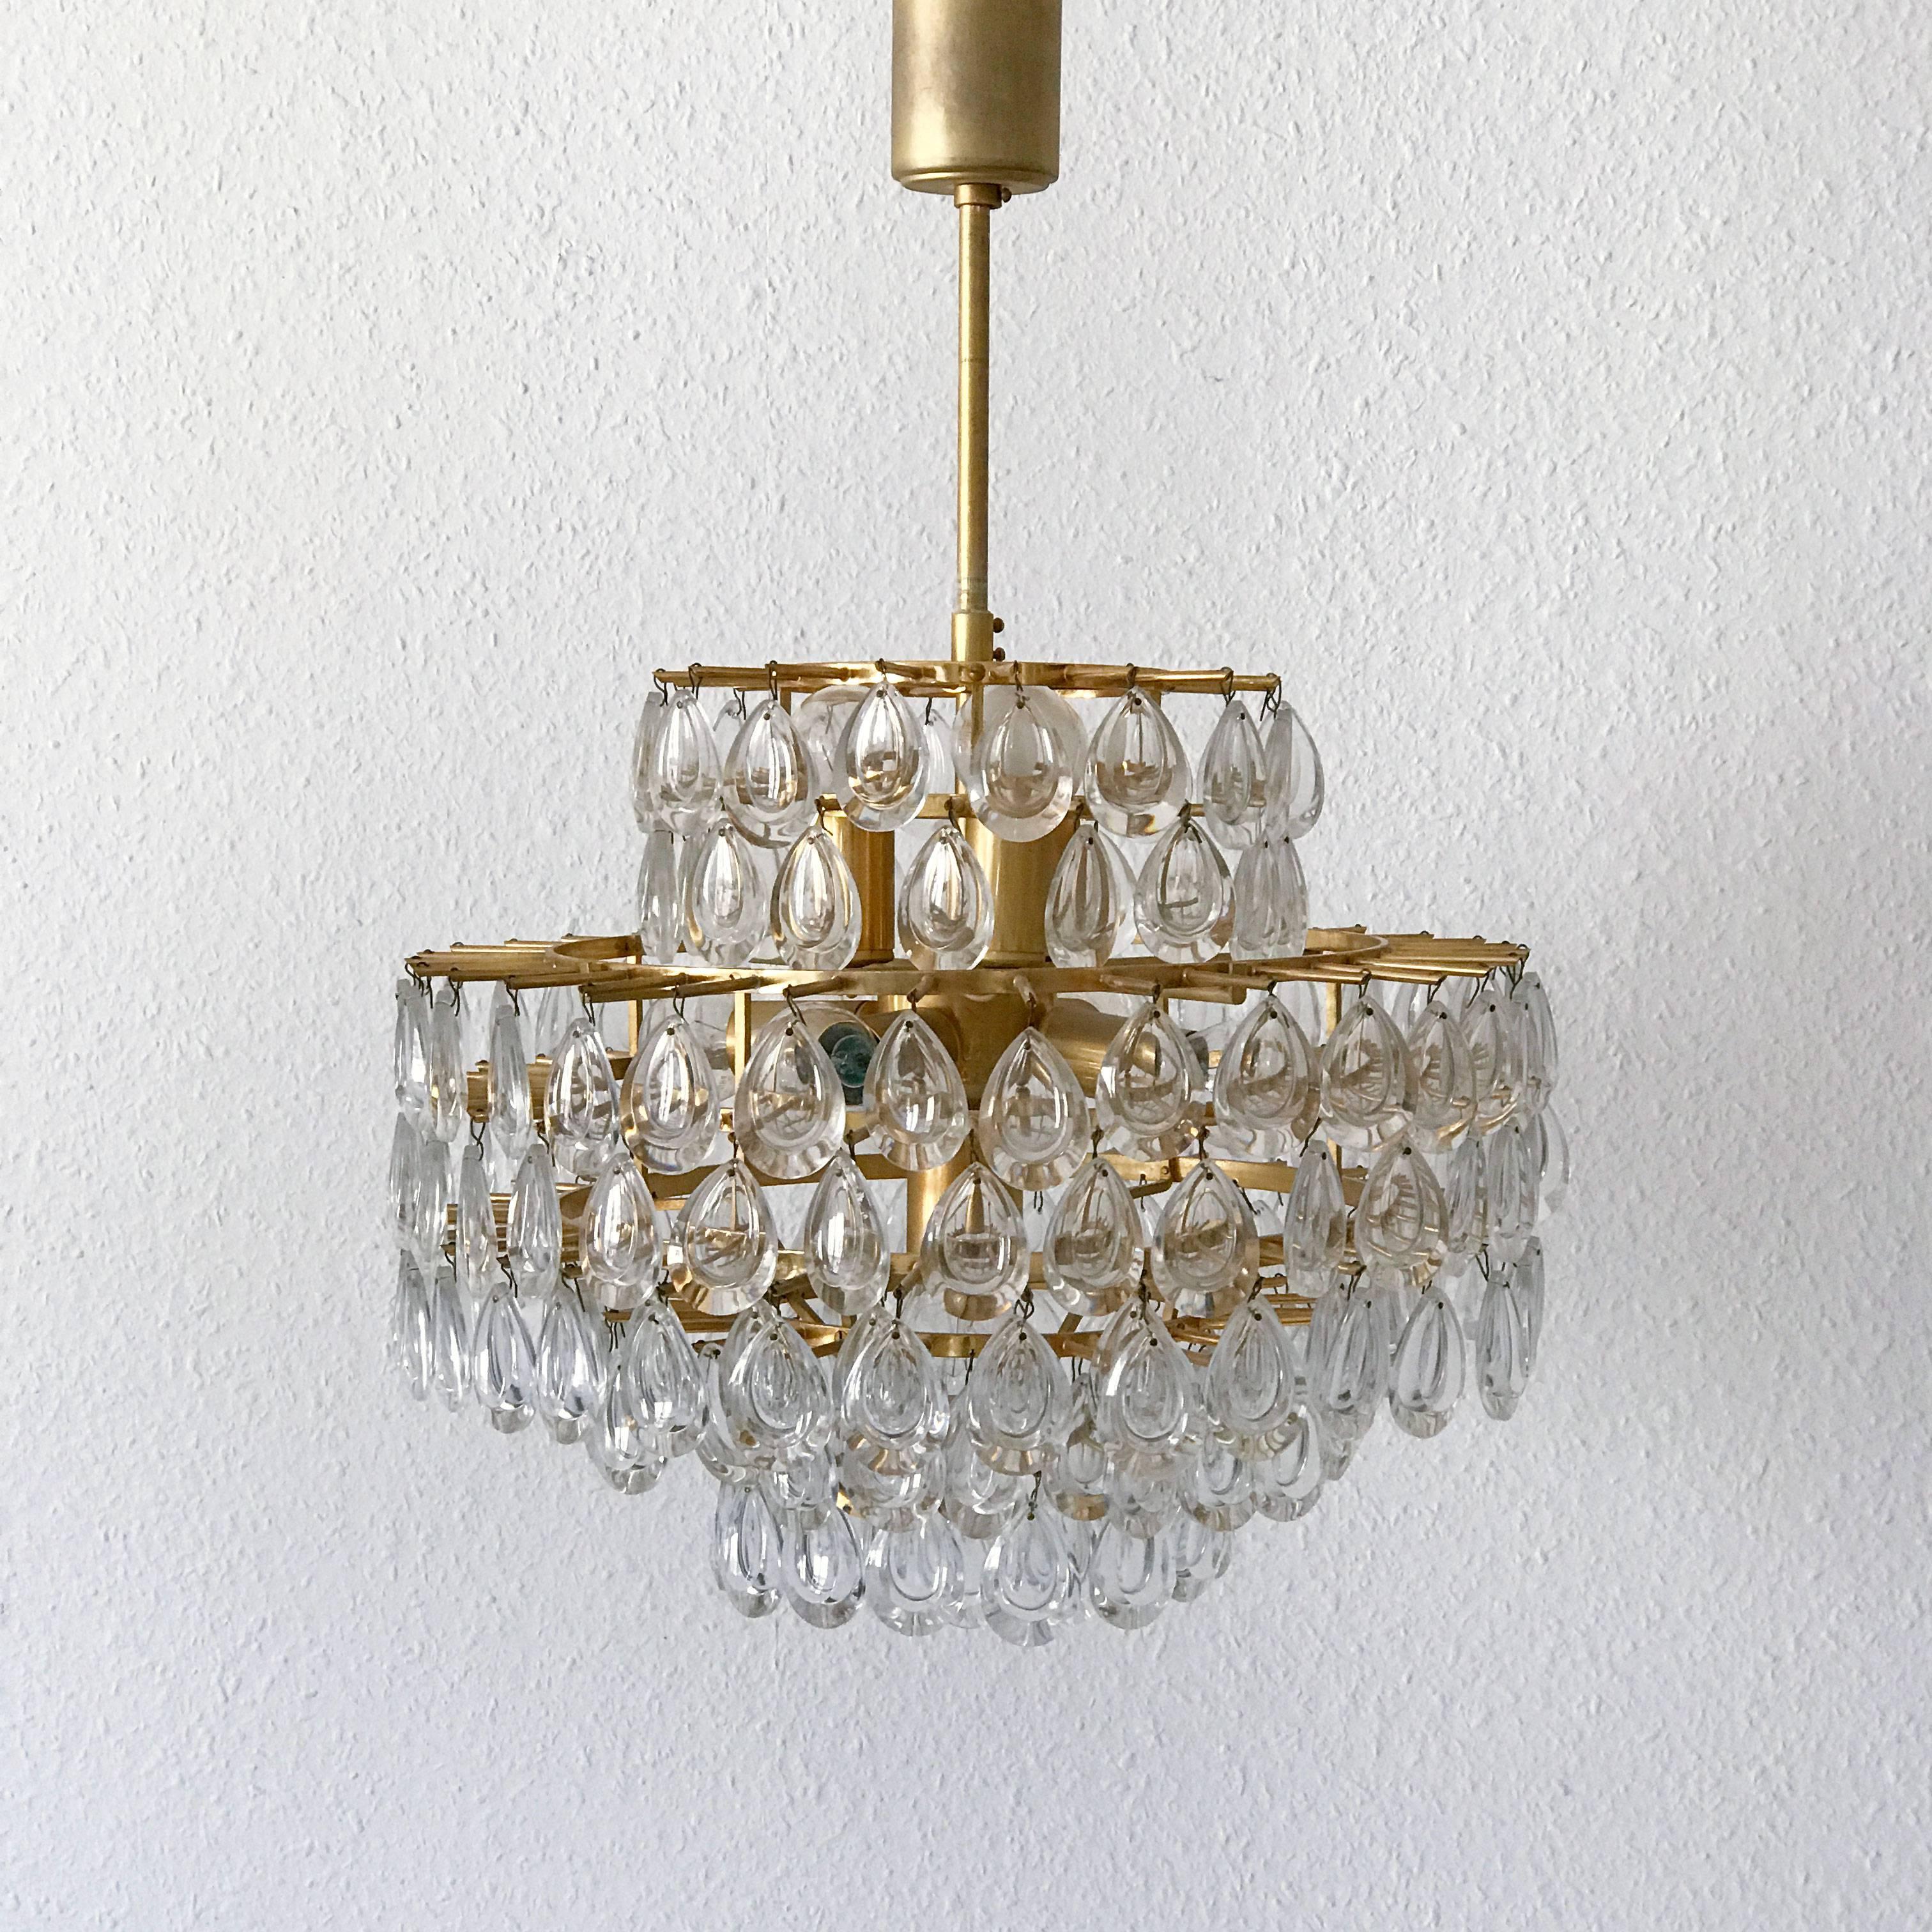 Mid-20th Century Seven-Tiered Gilt Brass Chandelier or Pendant Lamp by Palwa Germany 1960s For Sale